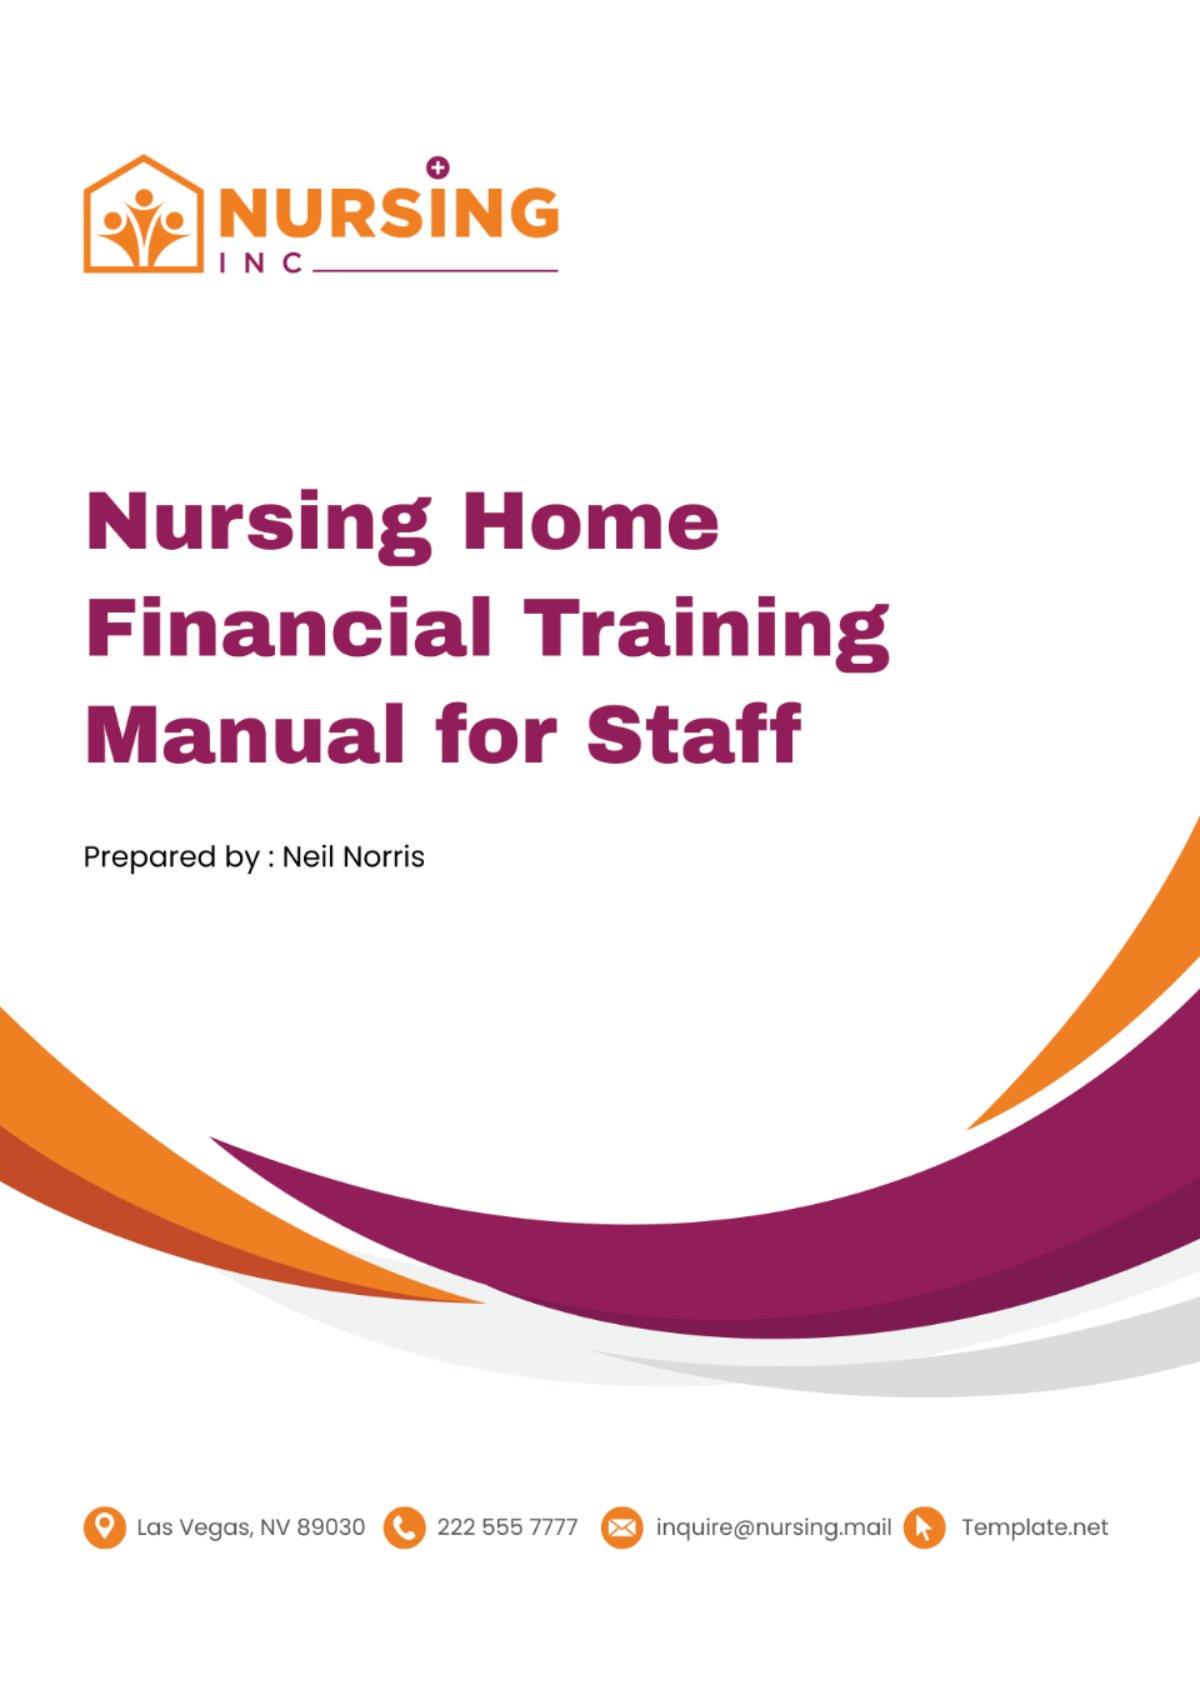 Nursing Home Financial Training Manual for Staff Template